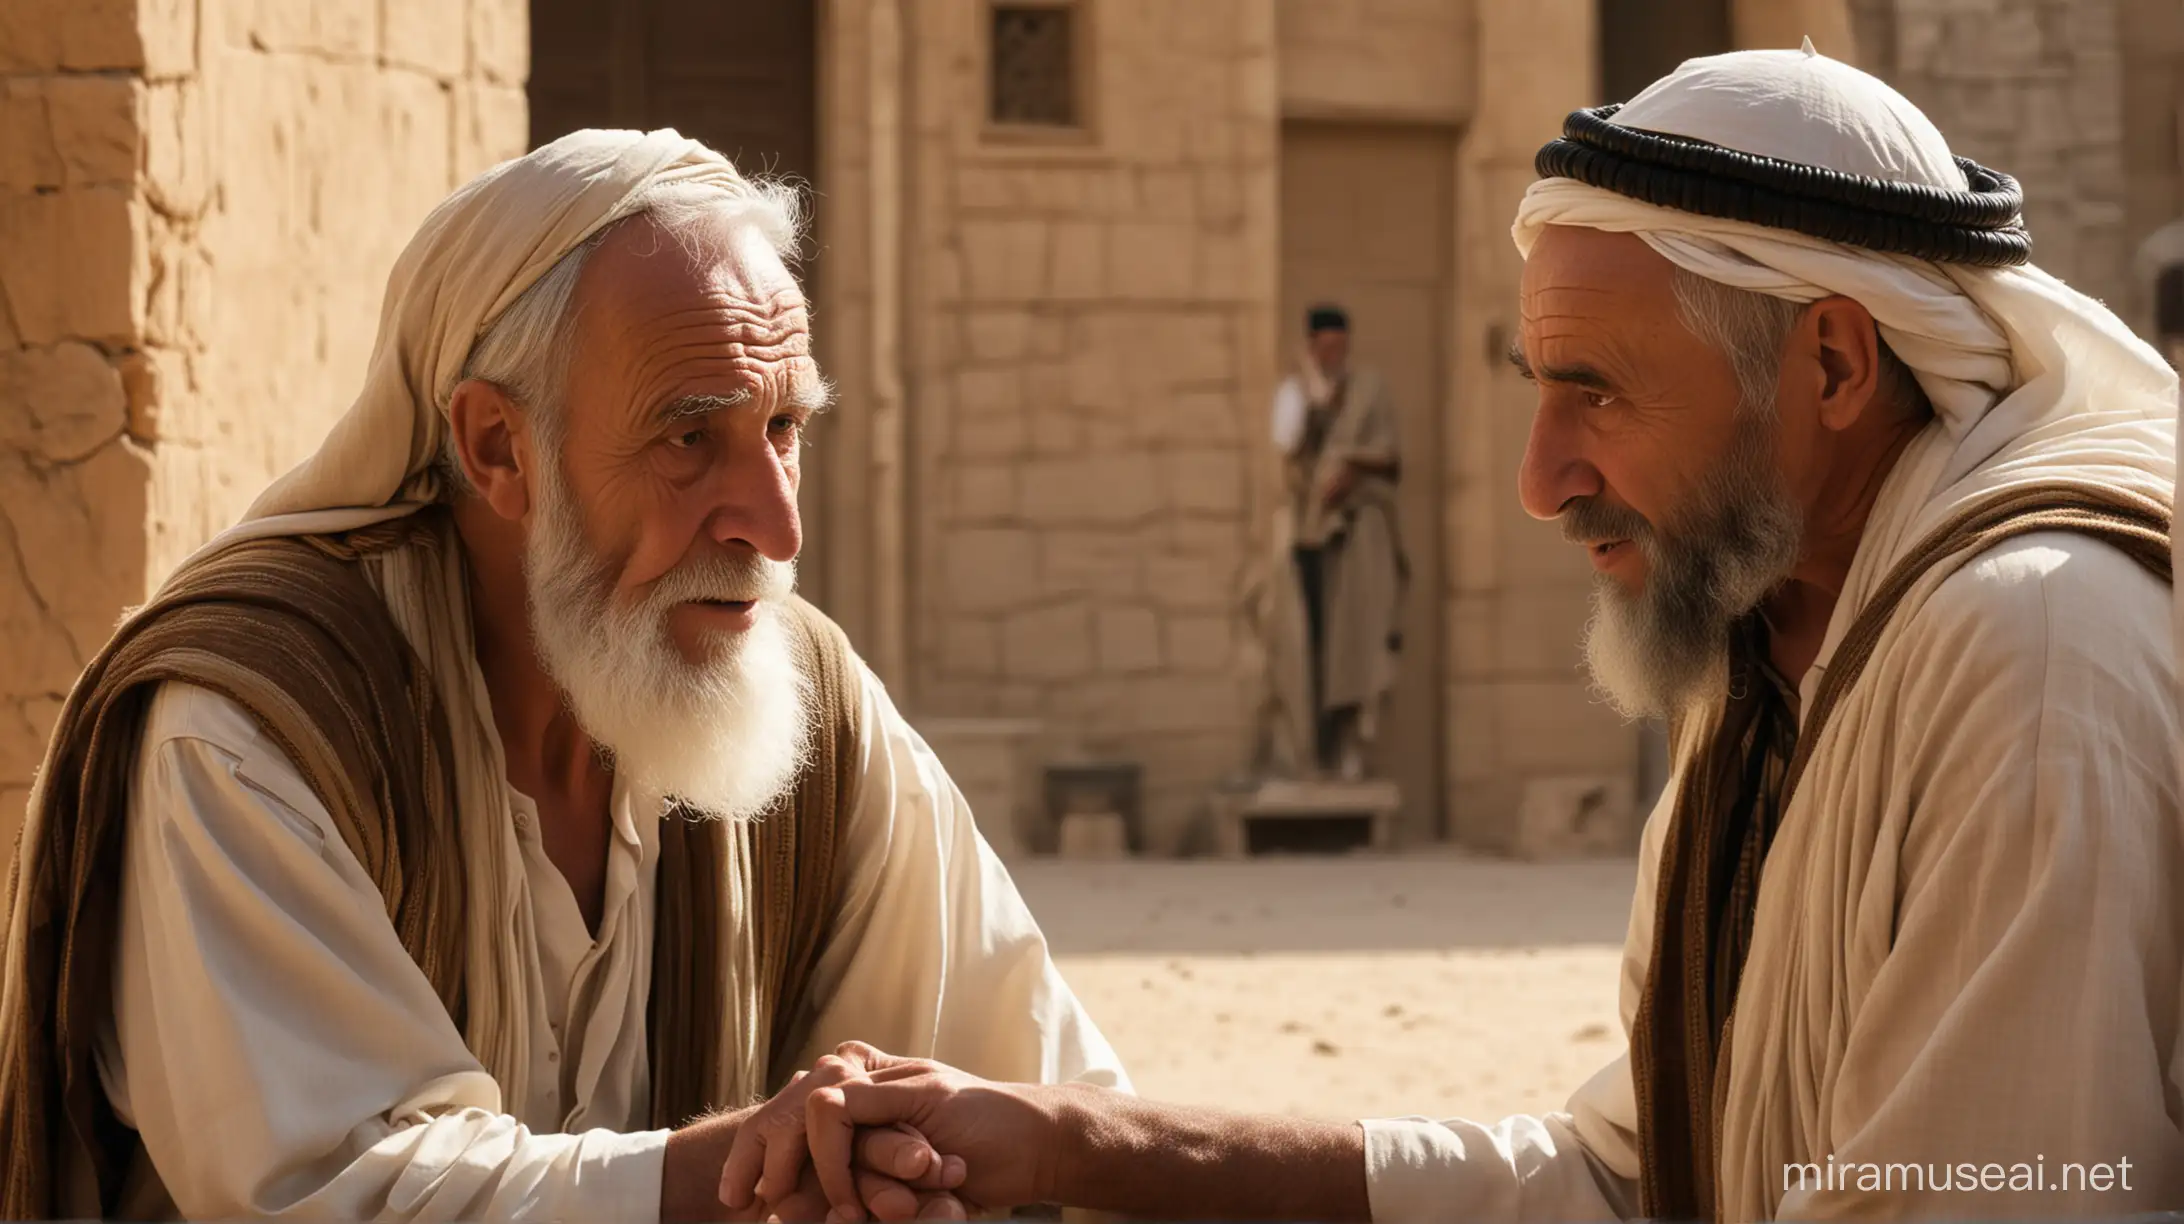 Biblical Era Conversation Old and Young Men in the Middle East